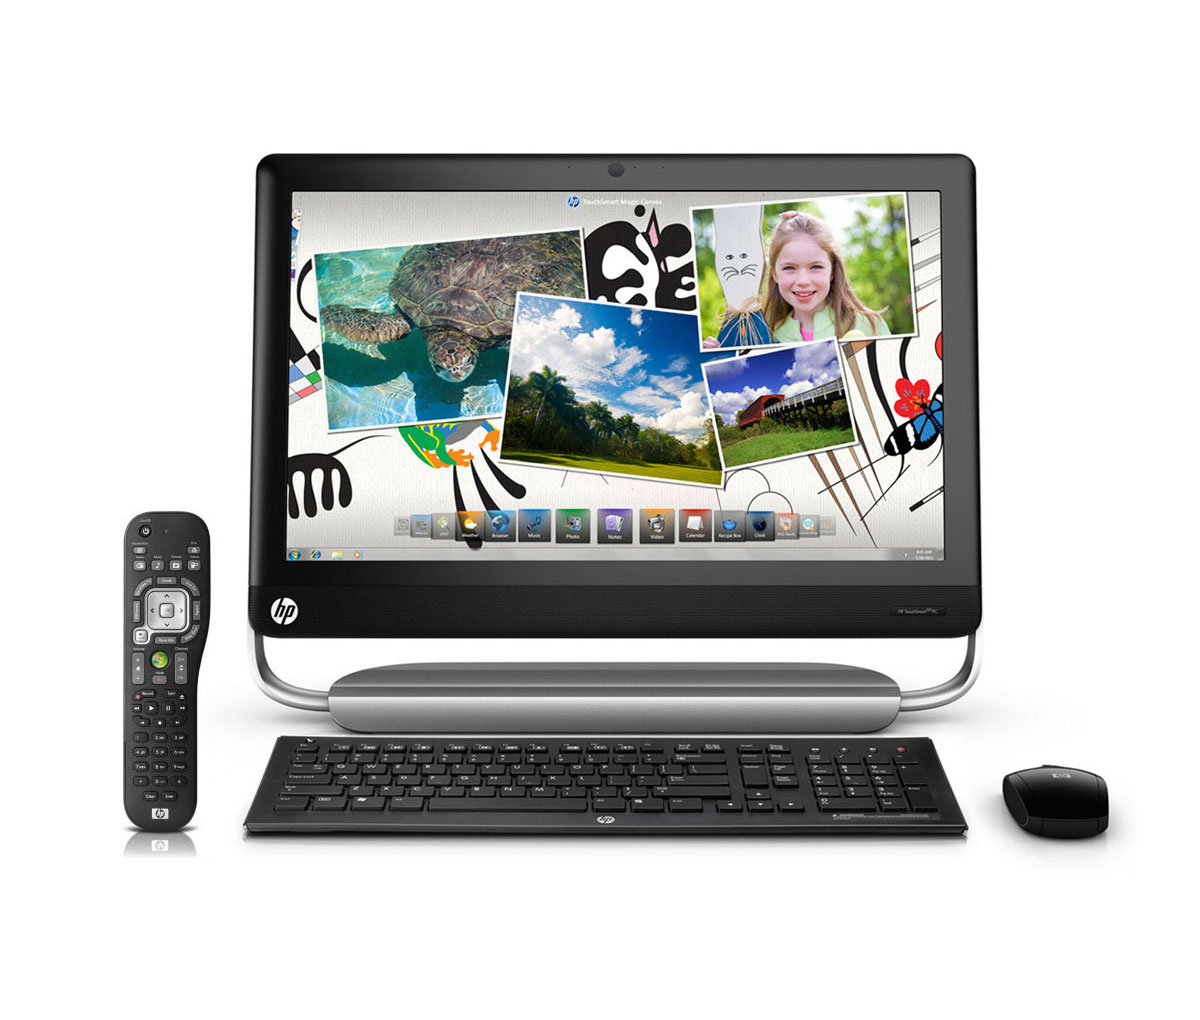 HP TouchSmart 520-1070 PC Front View